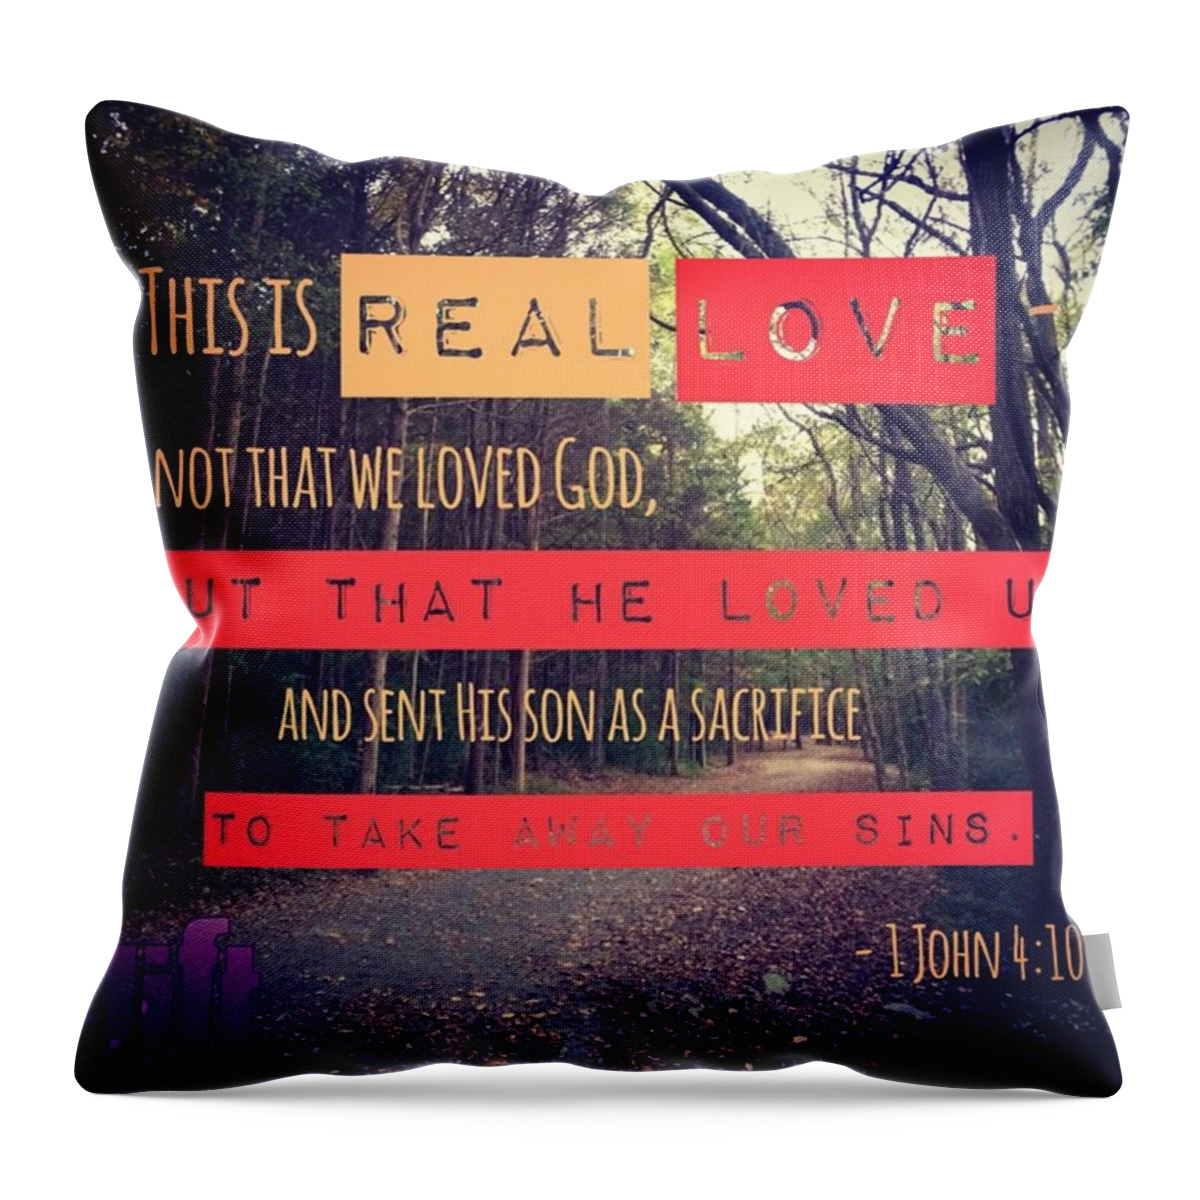 Perfectlove Throw Pillow featuring the photograph Dear Friends, Let Us Continue To Love by LIFT Women's Ministry designs --by Julie Hurttgam